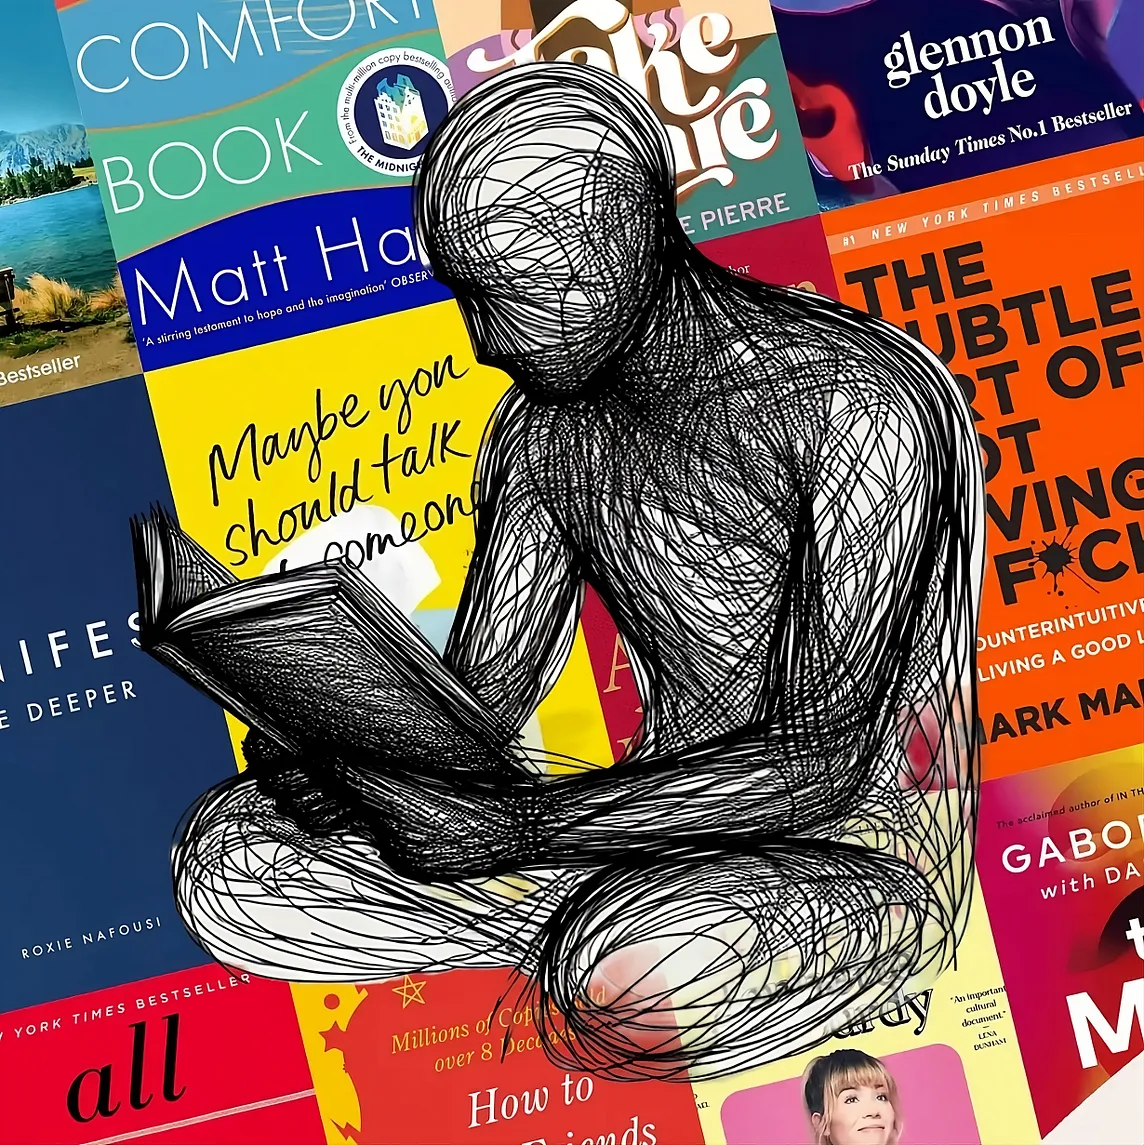 Of My 50+ Self-Help Reads, Only These 5 Have *Actually* Changed My Life